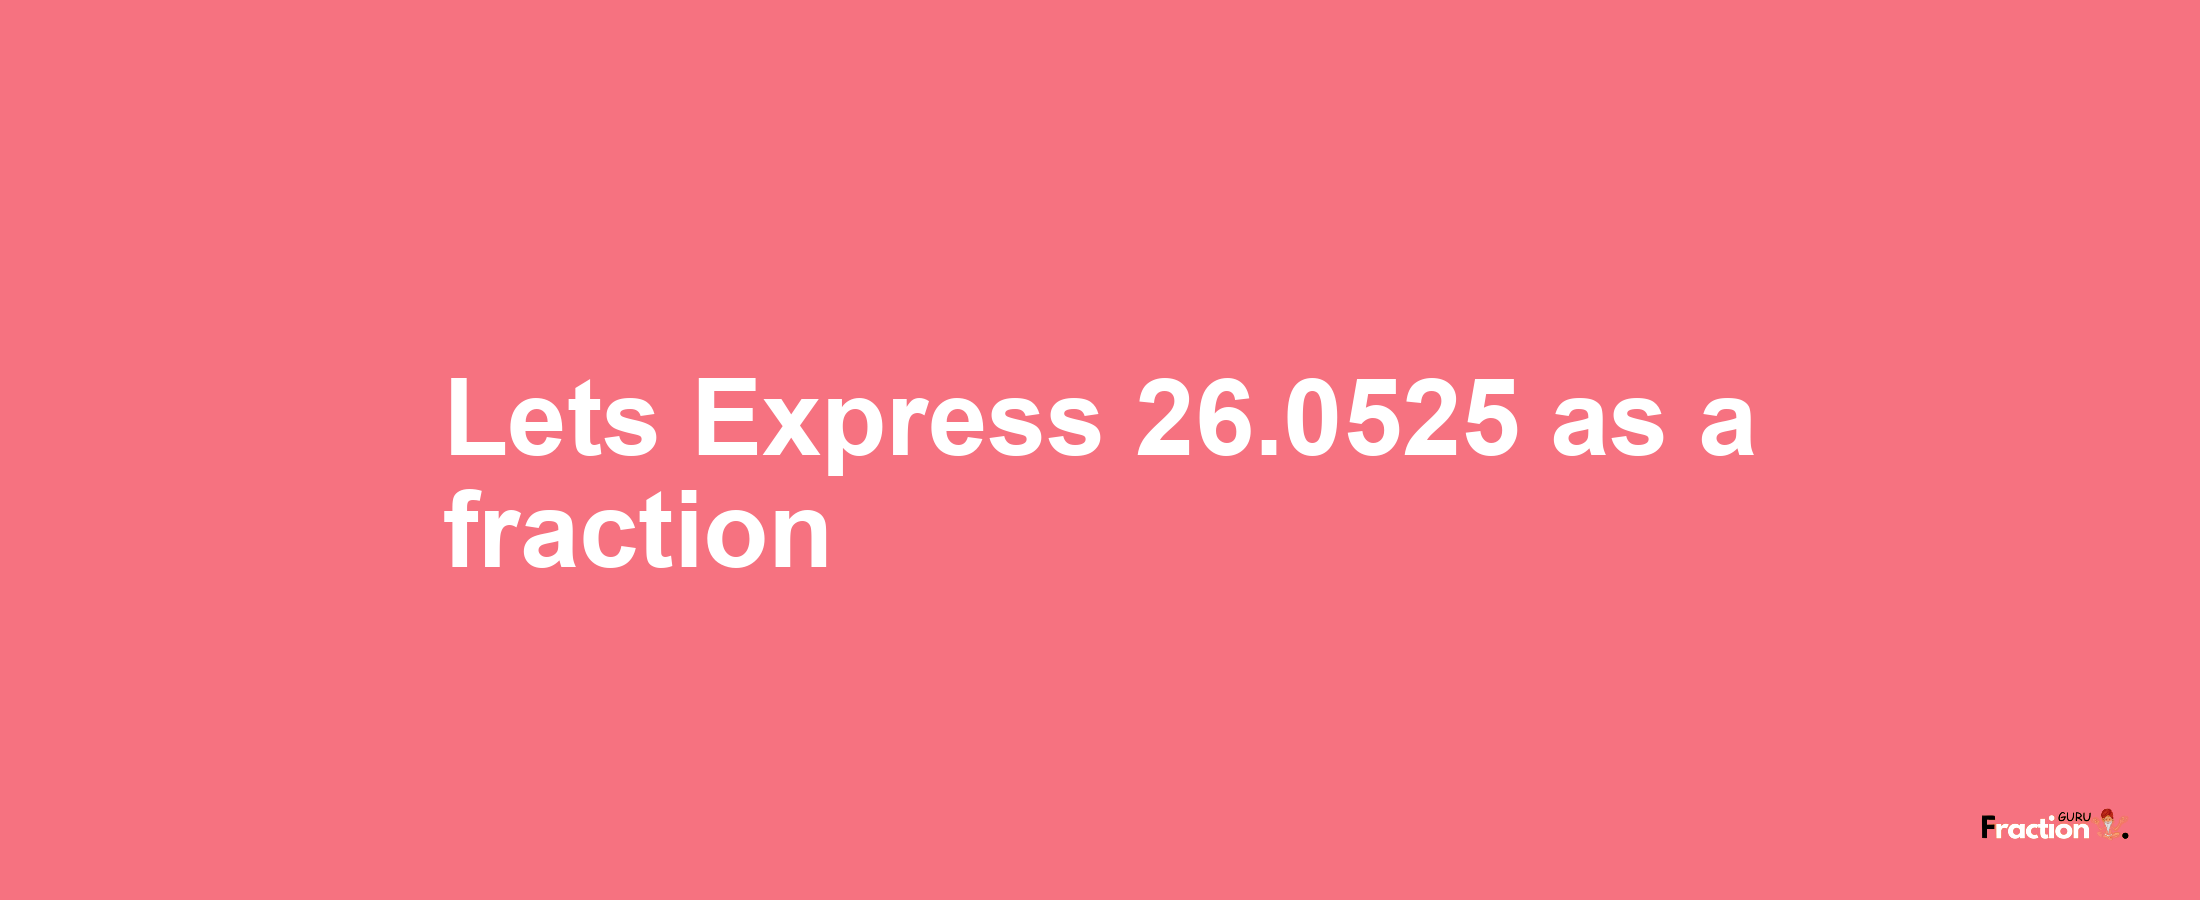 Lets Express 26.0525 as afraction